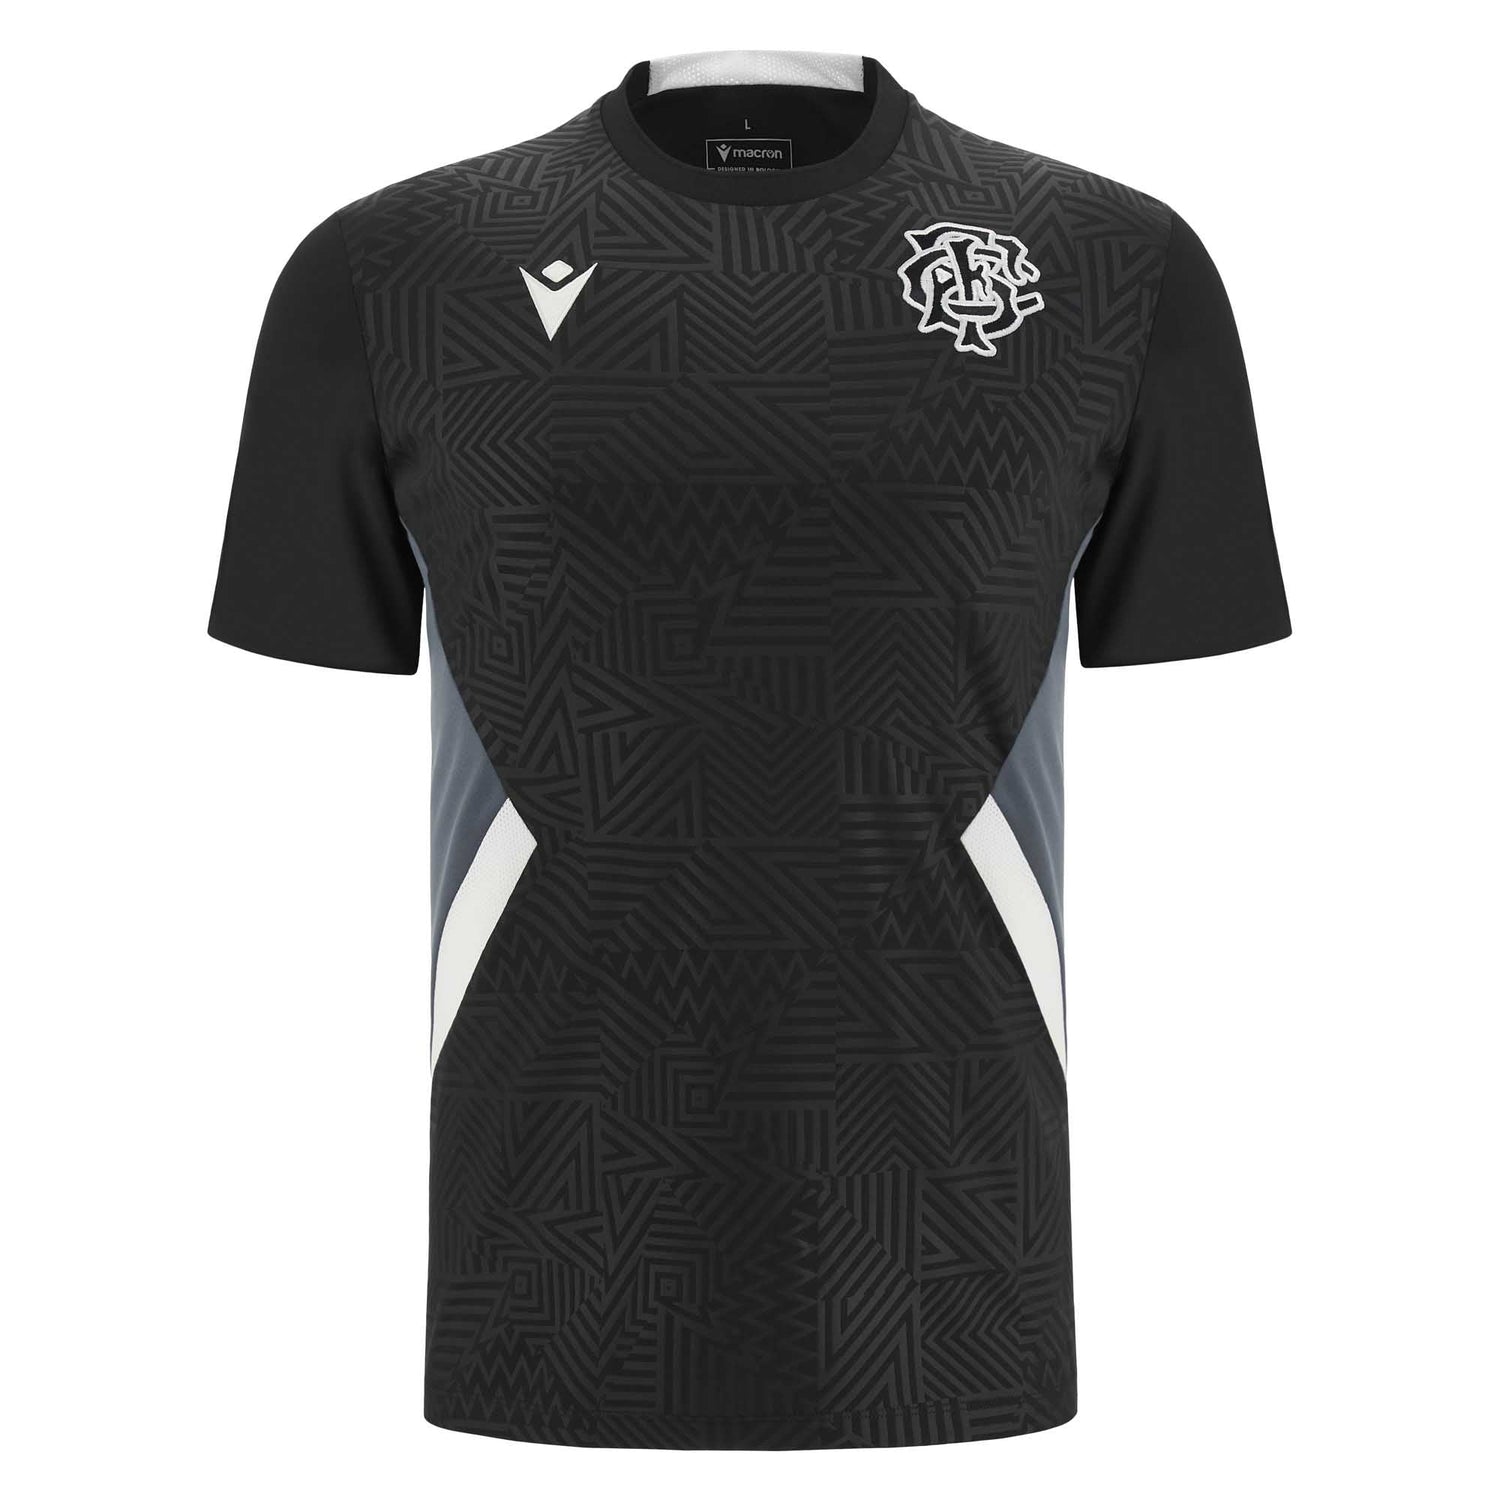 Barbarians Rugby Shirt & Merchandise | Absolute Rugby